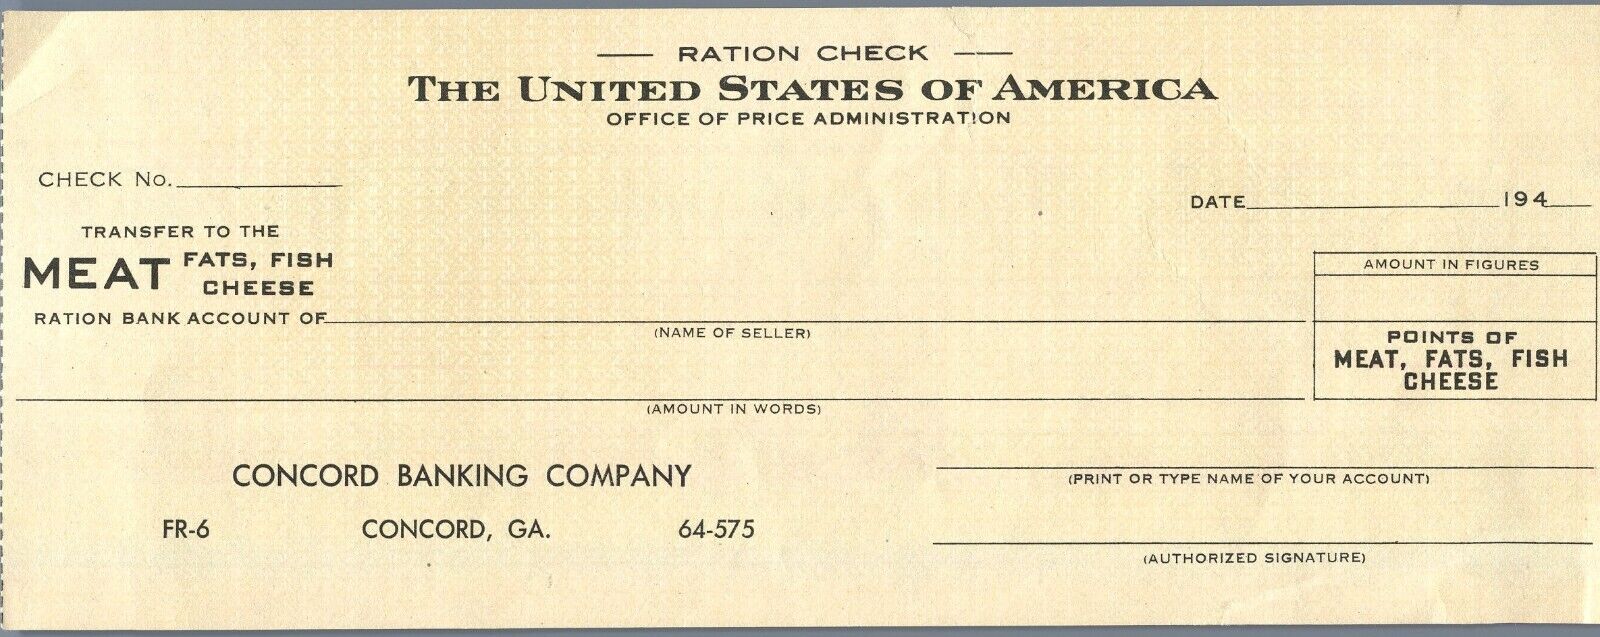 1940's Ration Check for Meats Issued by Office of Price Administration - Georgia